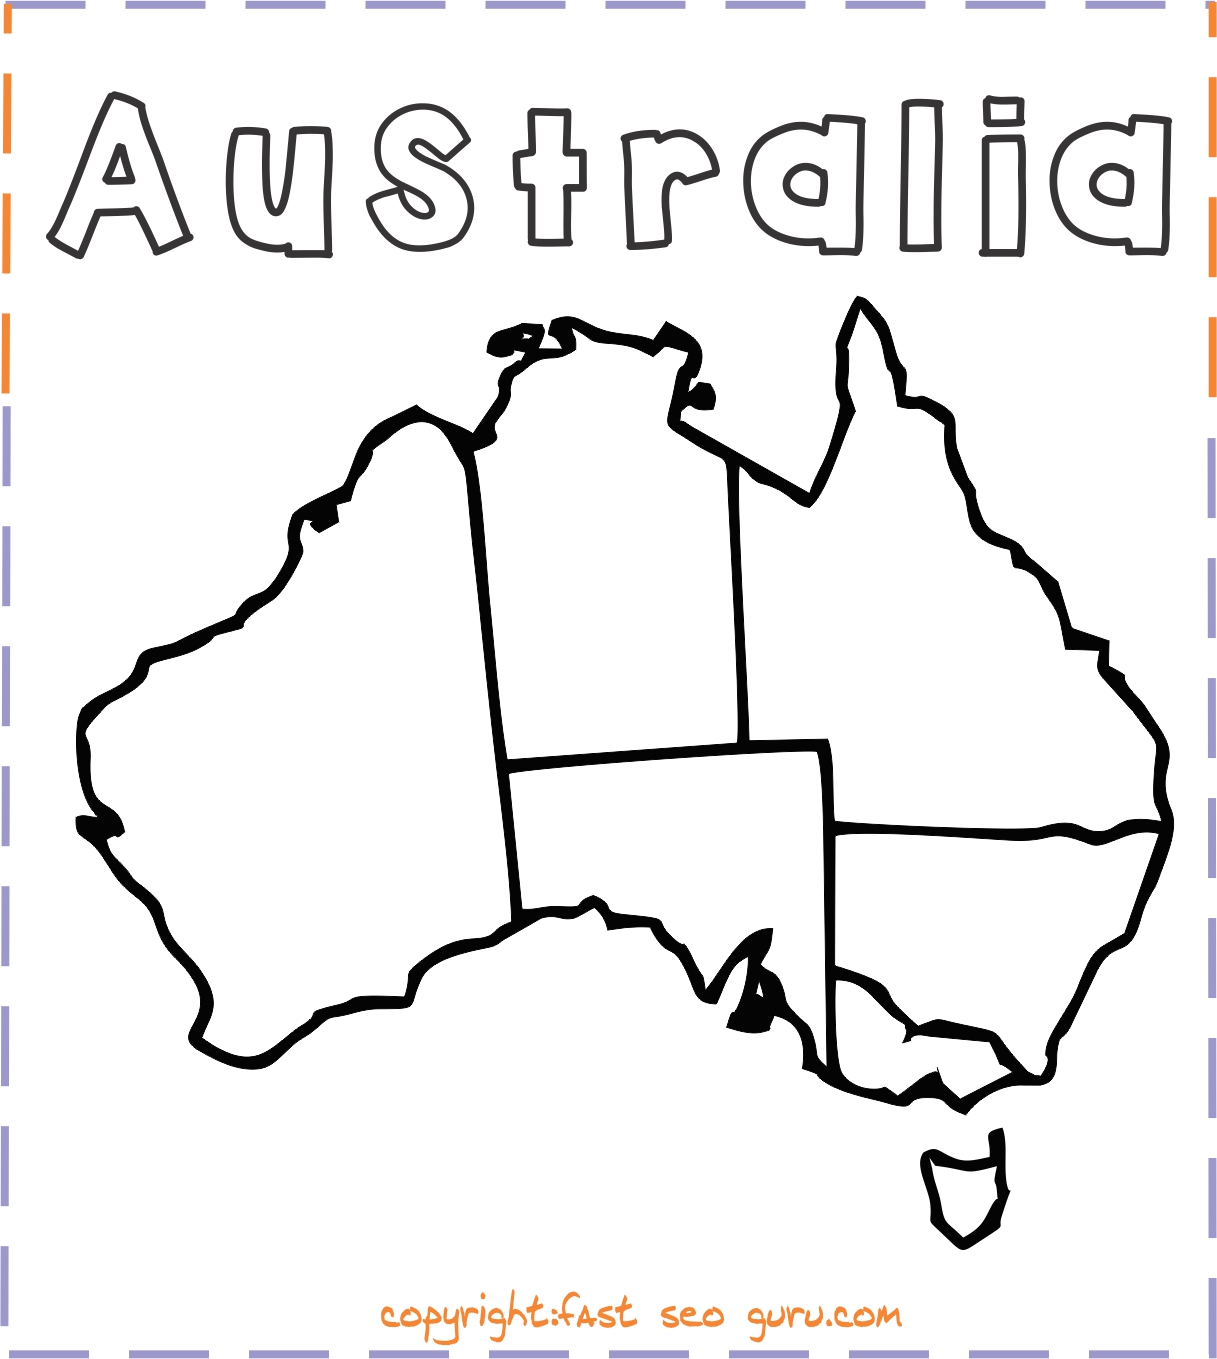 australia-coloring-pages-printable